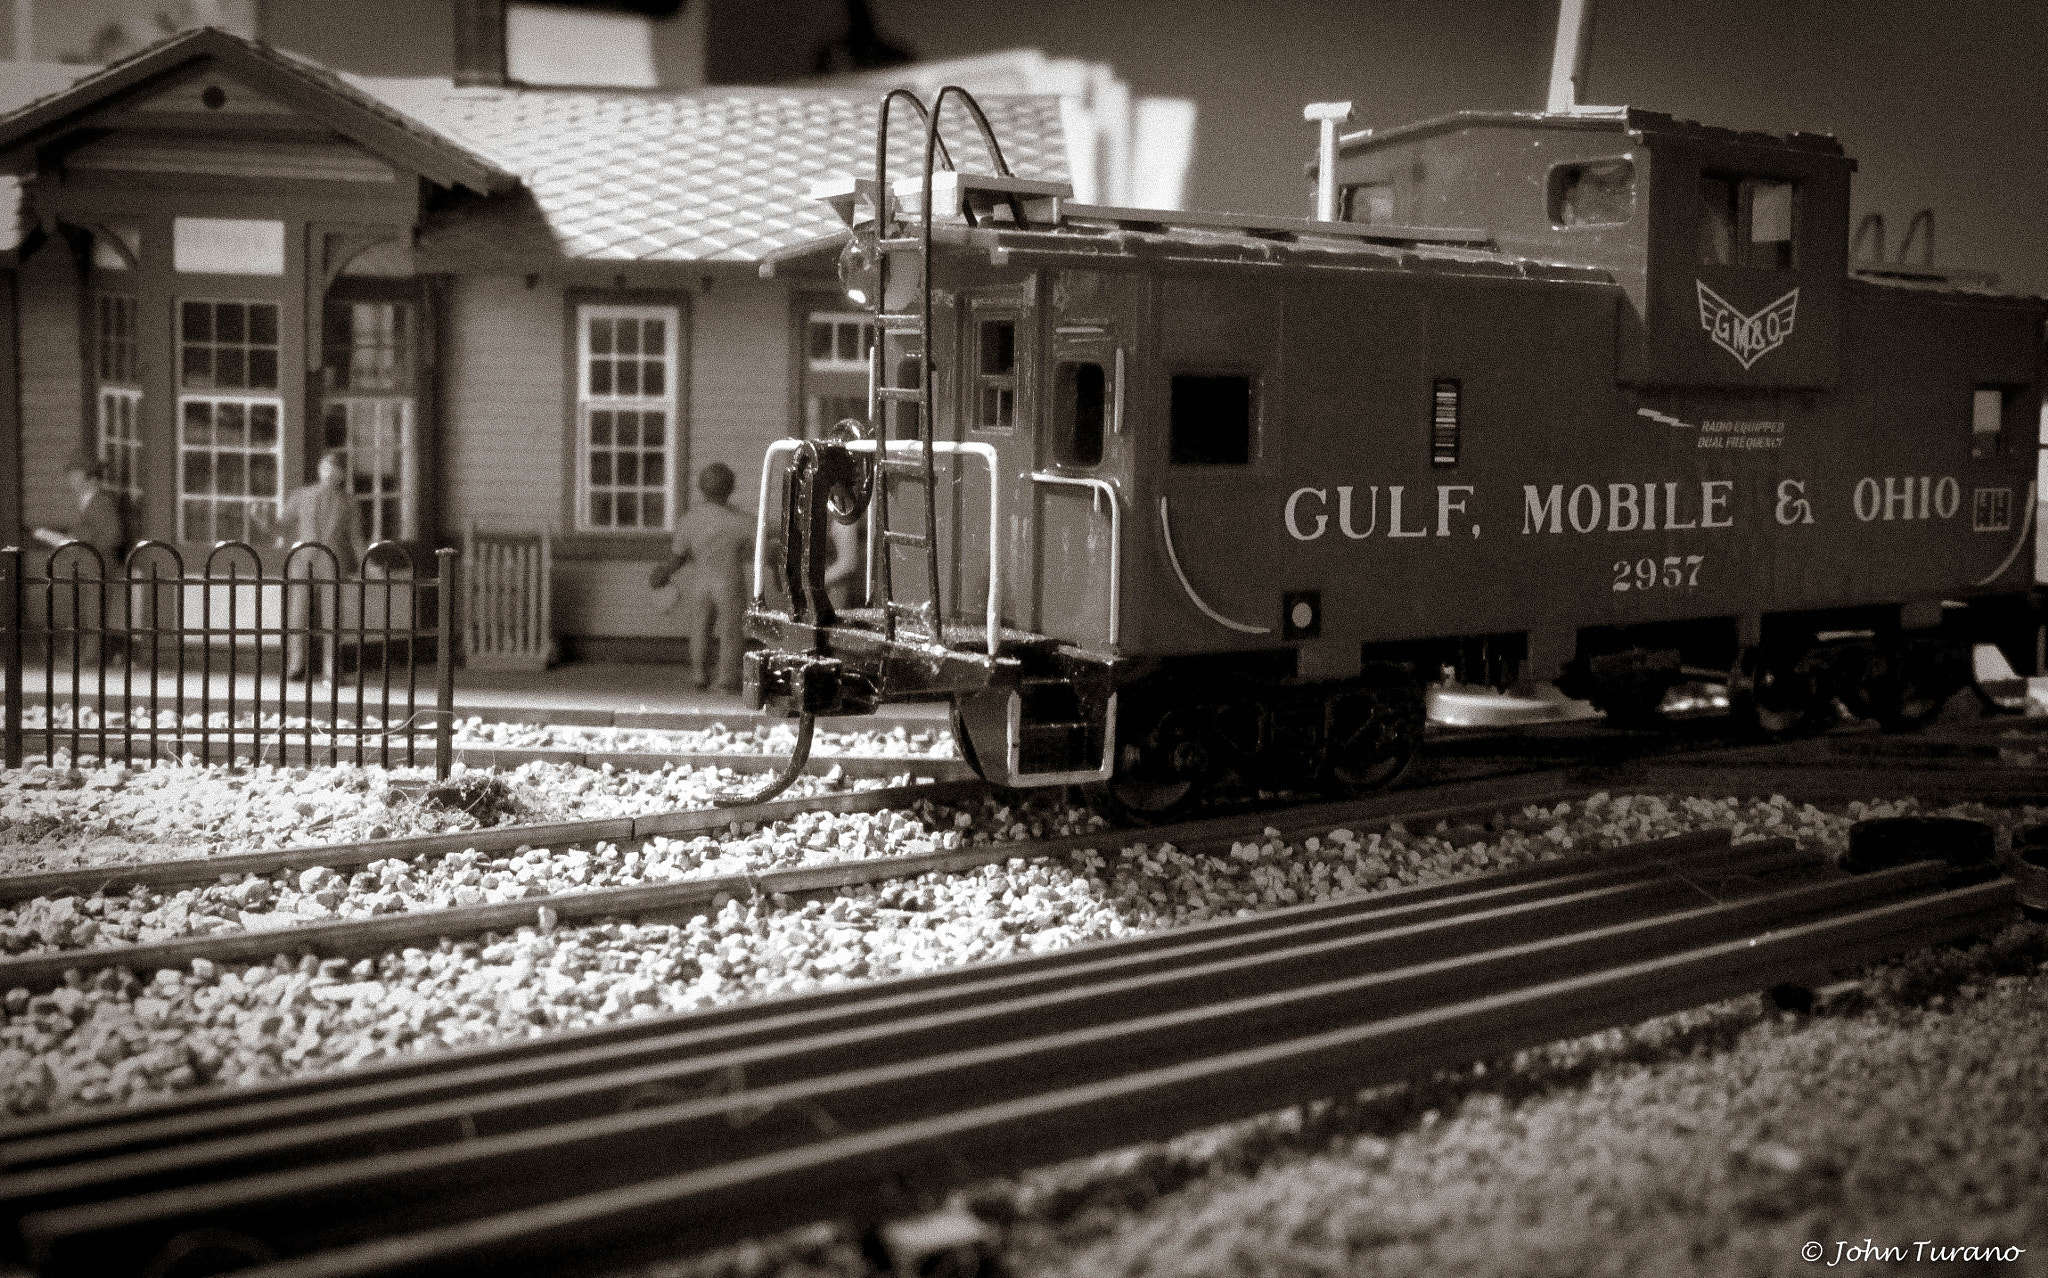 Canon PowerShot SX160 IS sample photo. Gm&o caboose photography